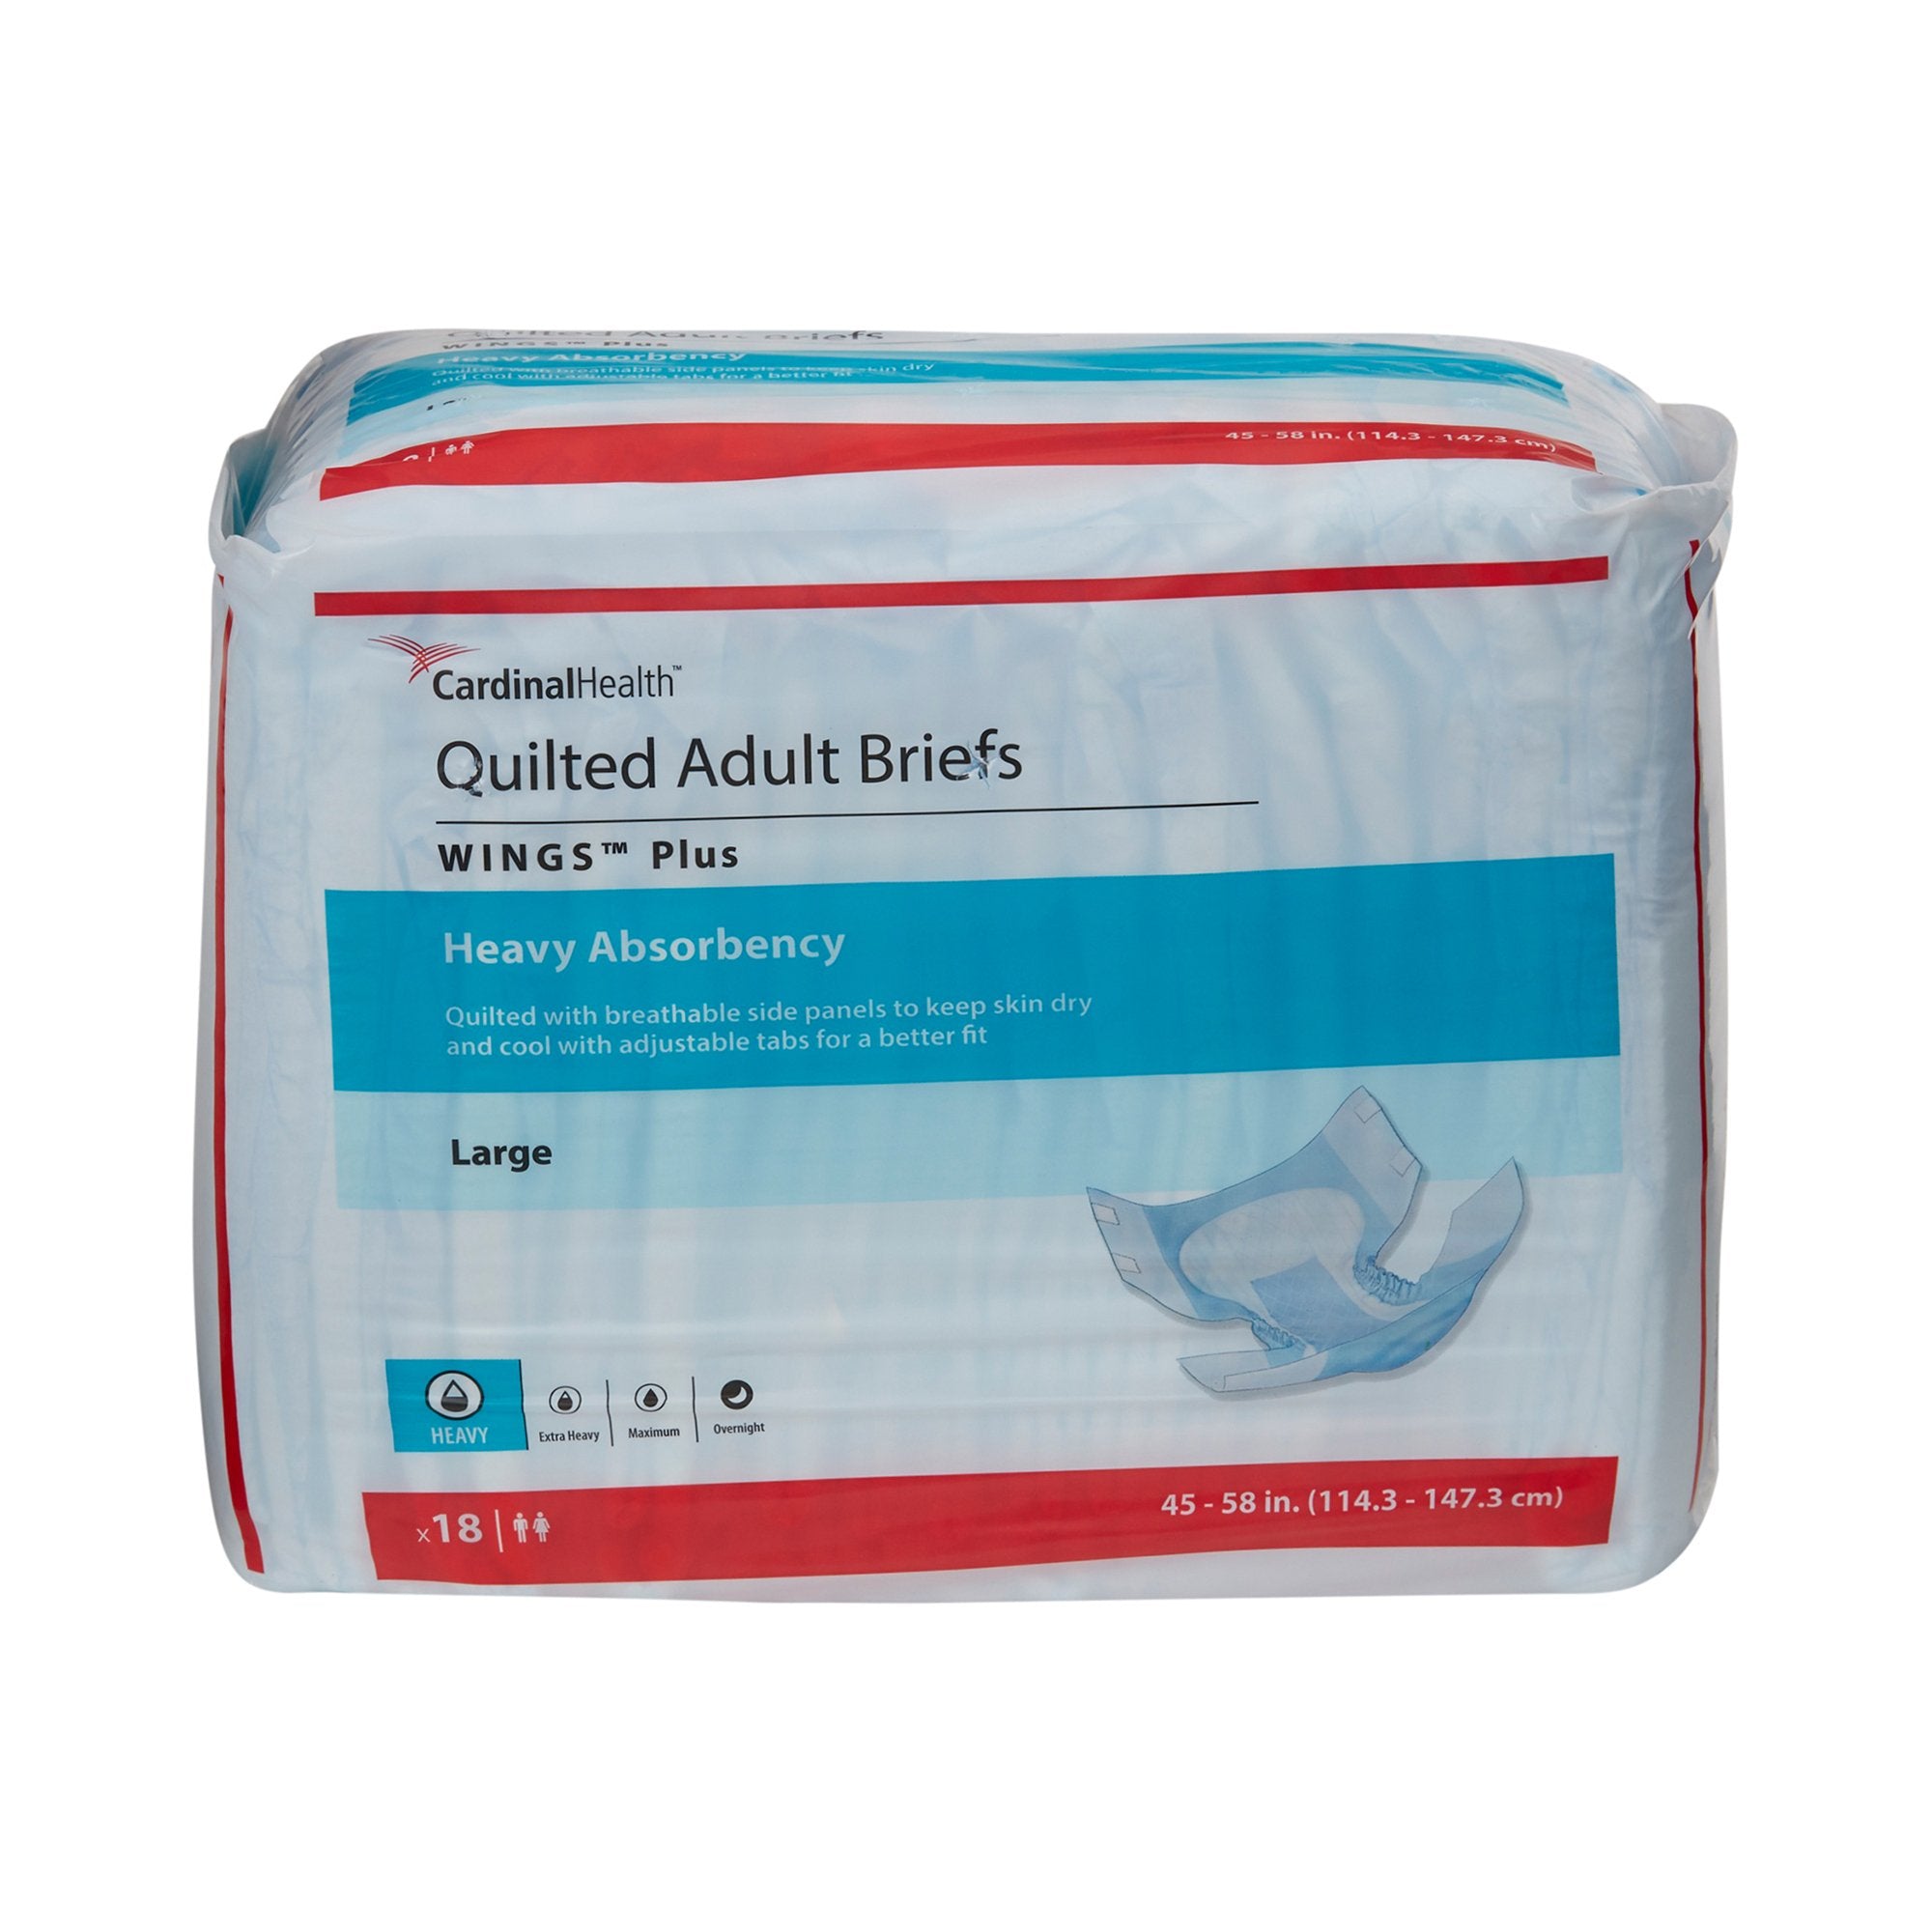 Wings™ Plus Quilted Heavy Absorbency Brief, Large - Unisex Adult Incontinence